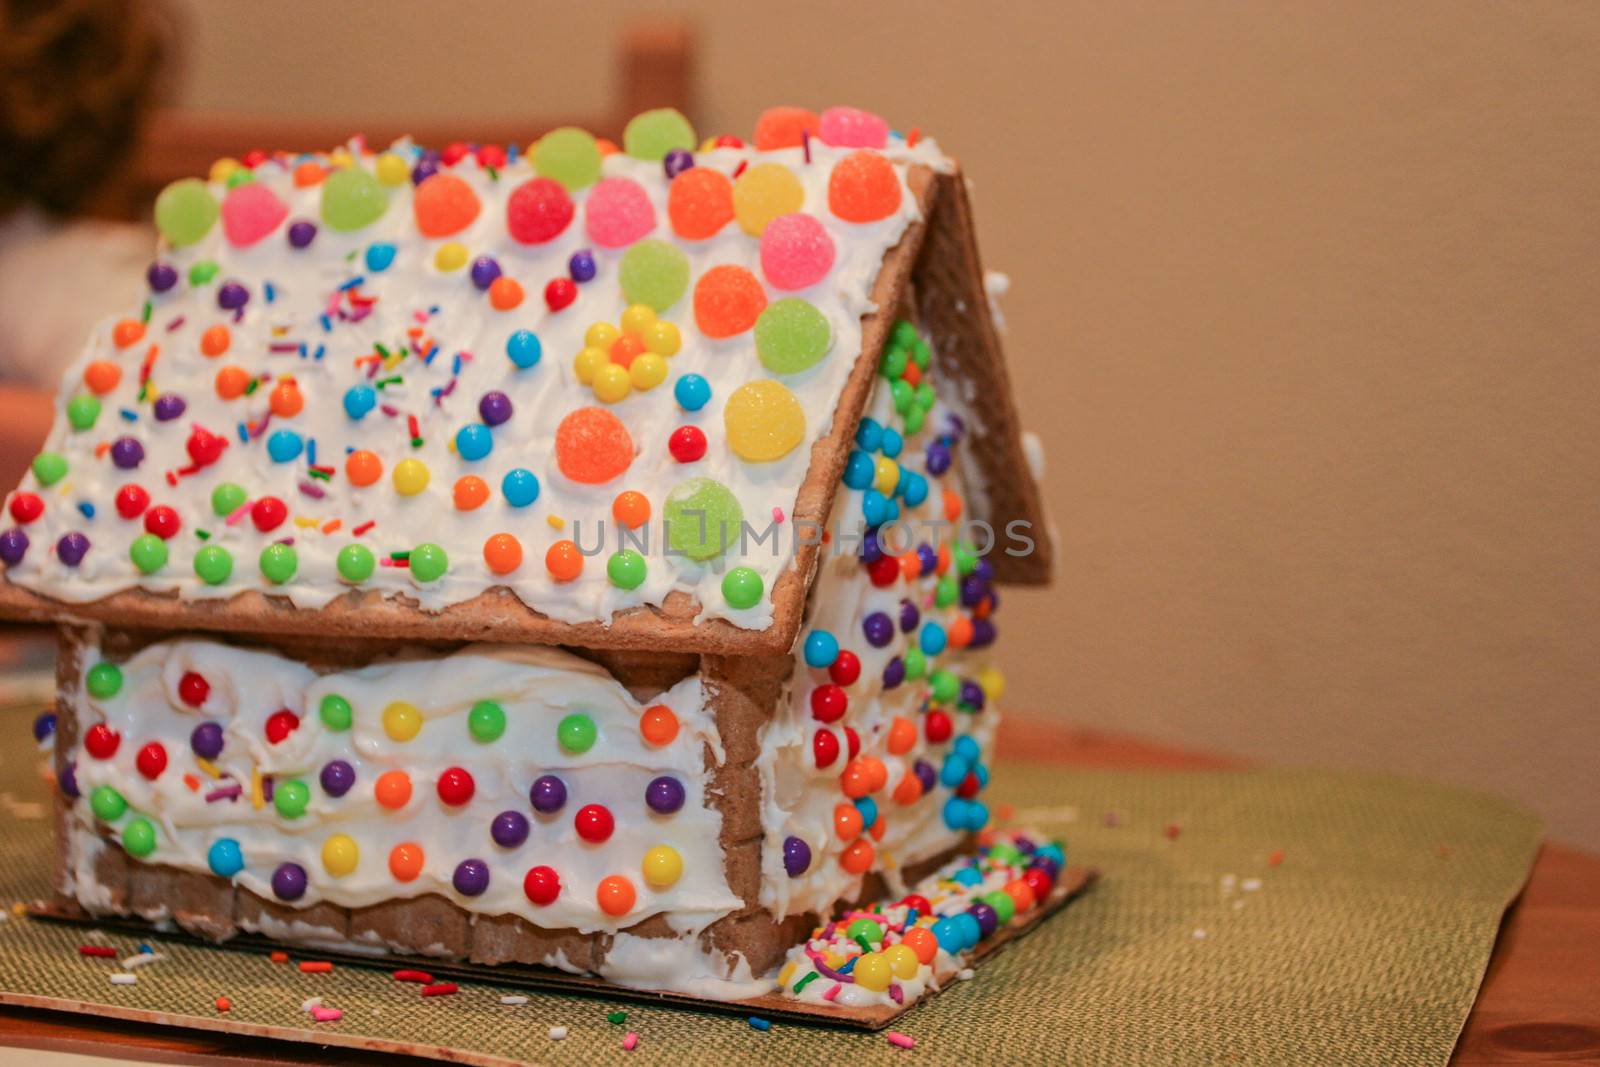 Making gingerbread house together at home before Christmas.